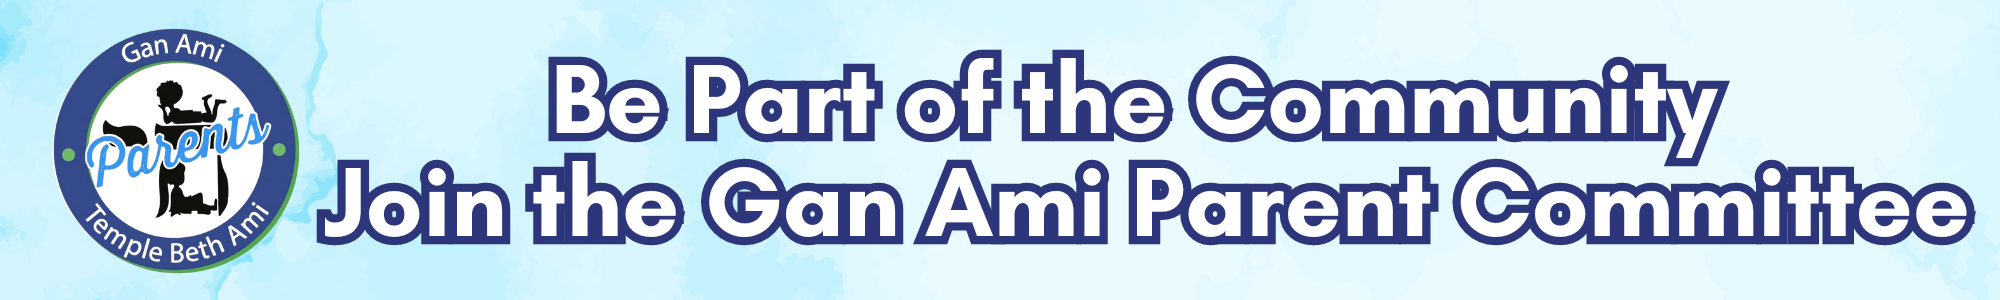 Be Part of the Gan Ami Parent Committee (2000 x 300 px)